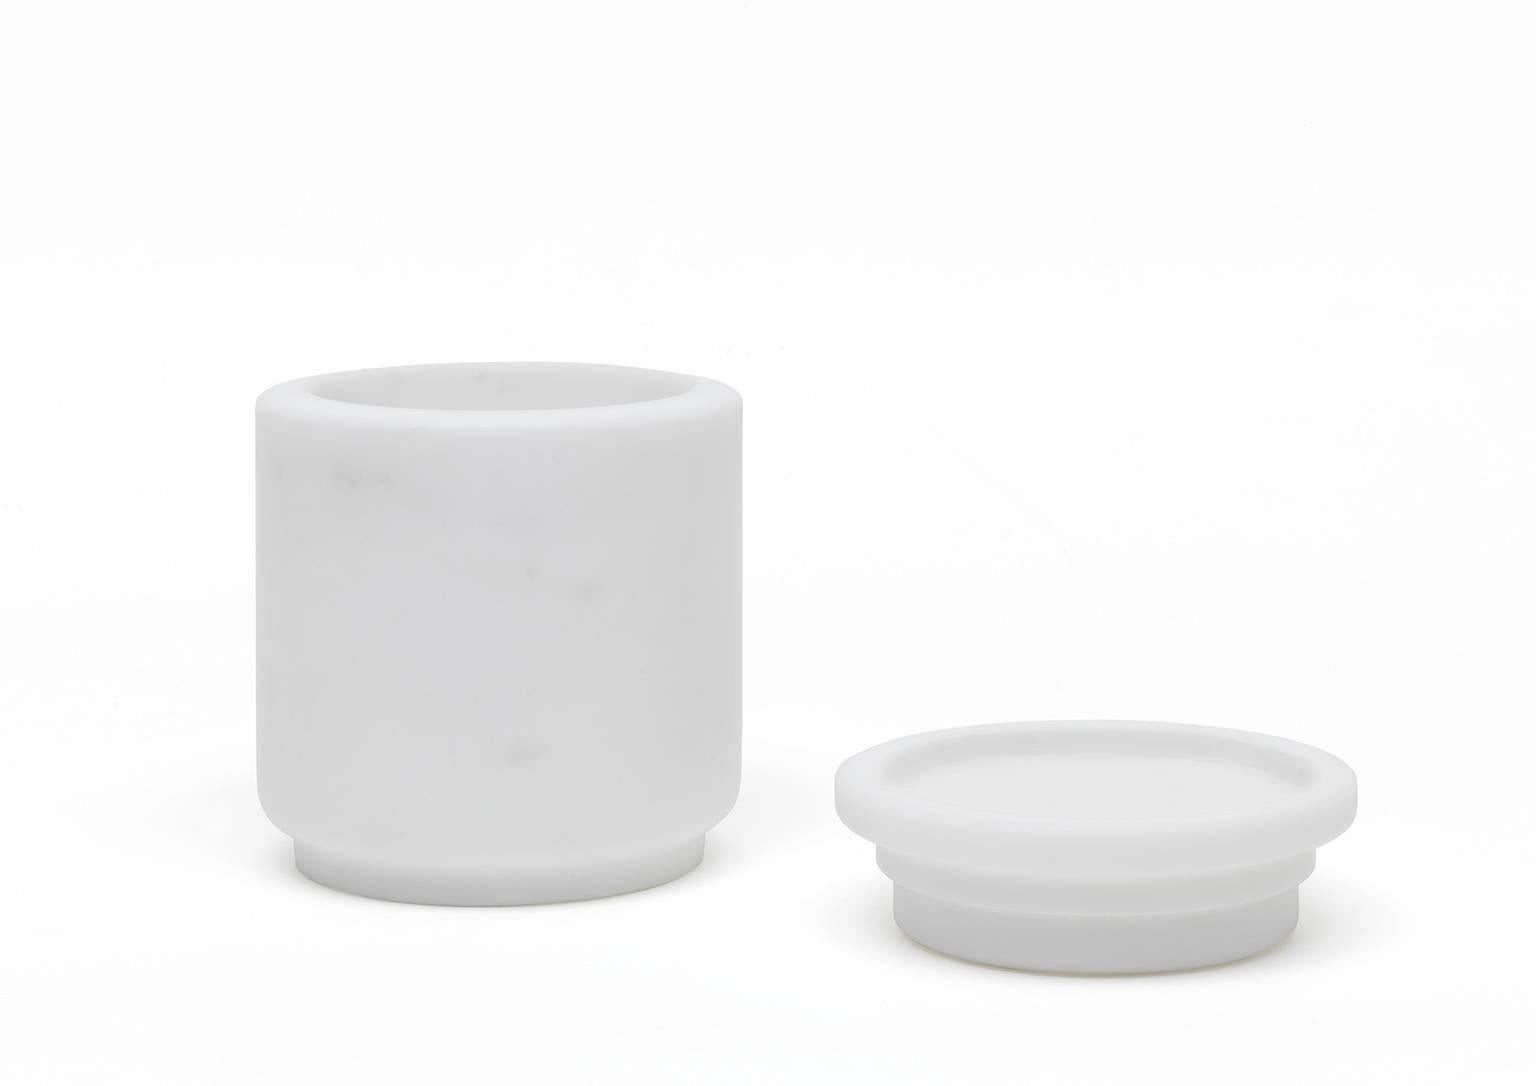 Pyxis pot or jar or container for multiple uses.
Size: 12.6 x 14.5 cm, smooth finishing. Commercial name: Pyxis M, Pyxis Collection by the Spanish Designer Ivan Colominas. Available also in black Marquinia marble and different sizes. Made in Italy,